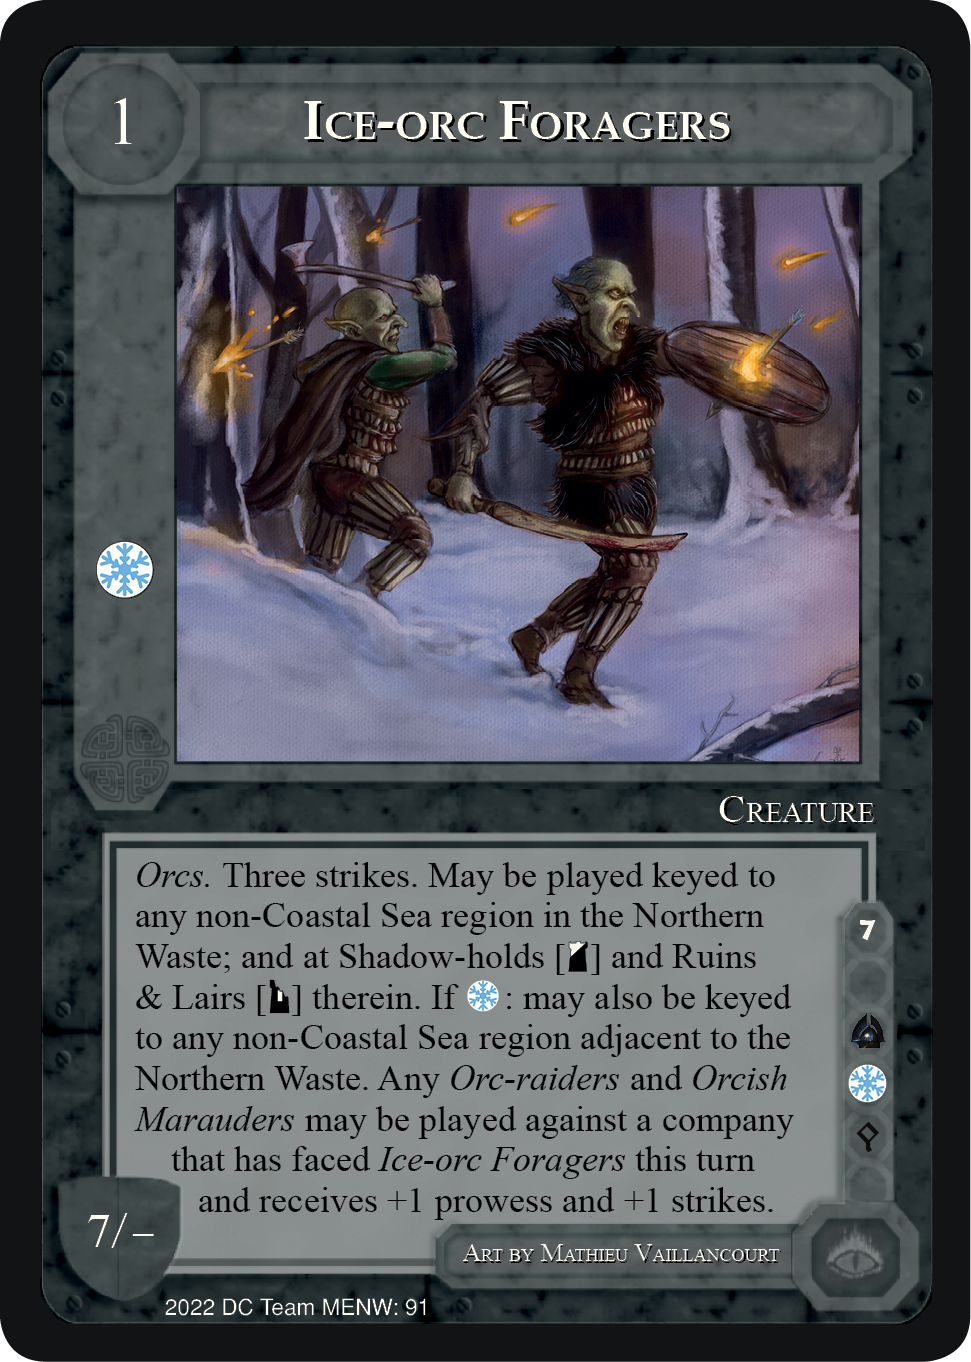 Ice-orc foragers